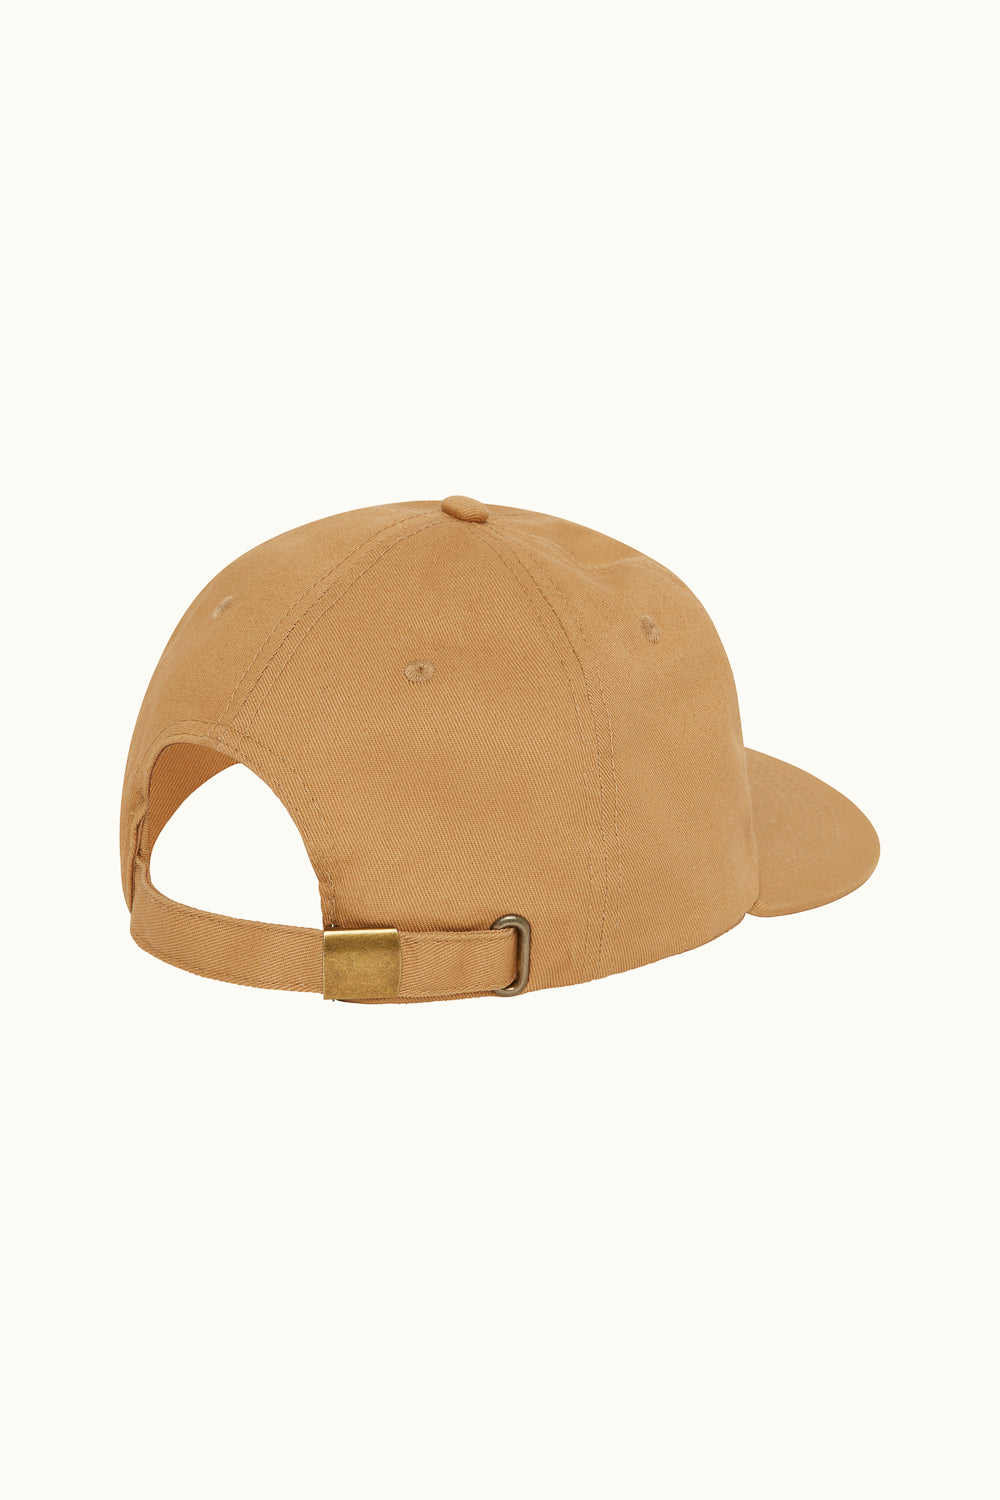 The Travel Hat - Brown